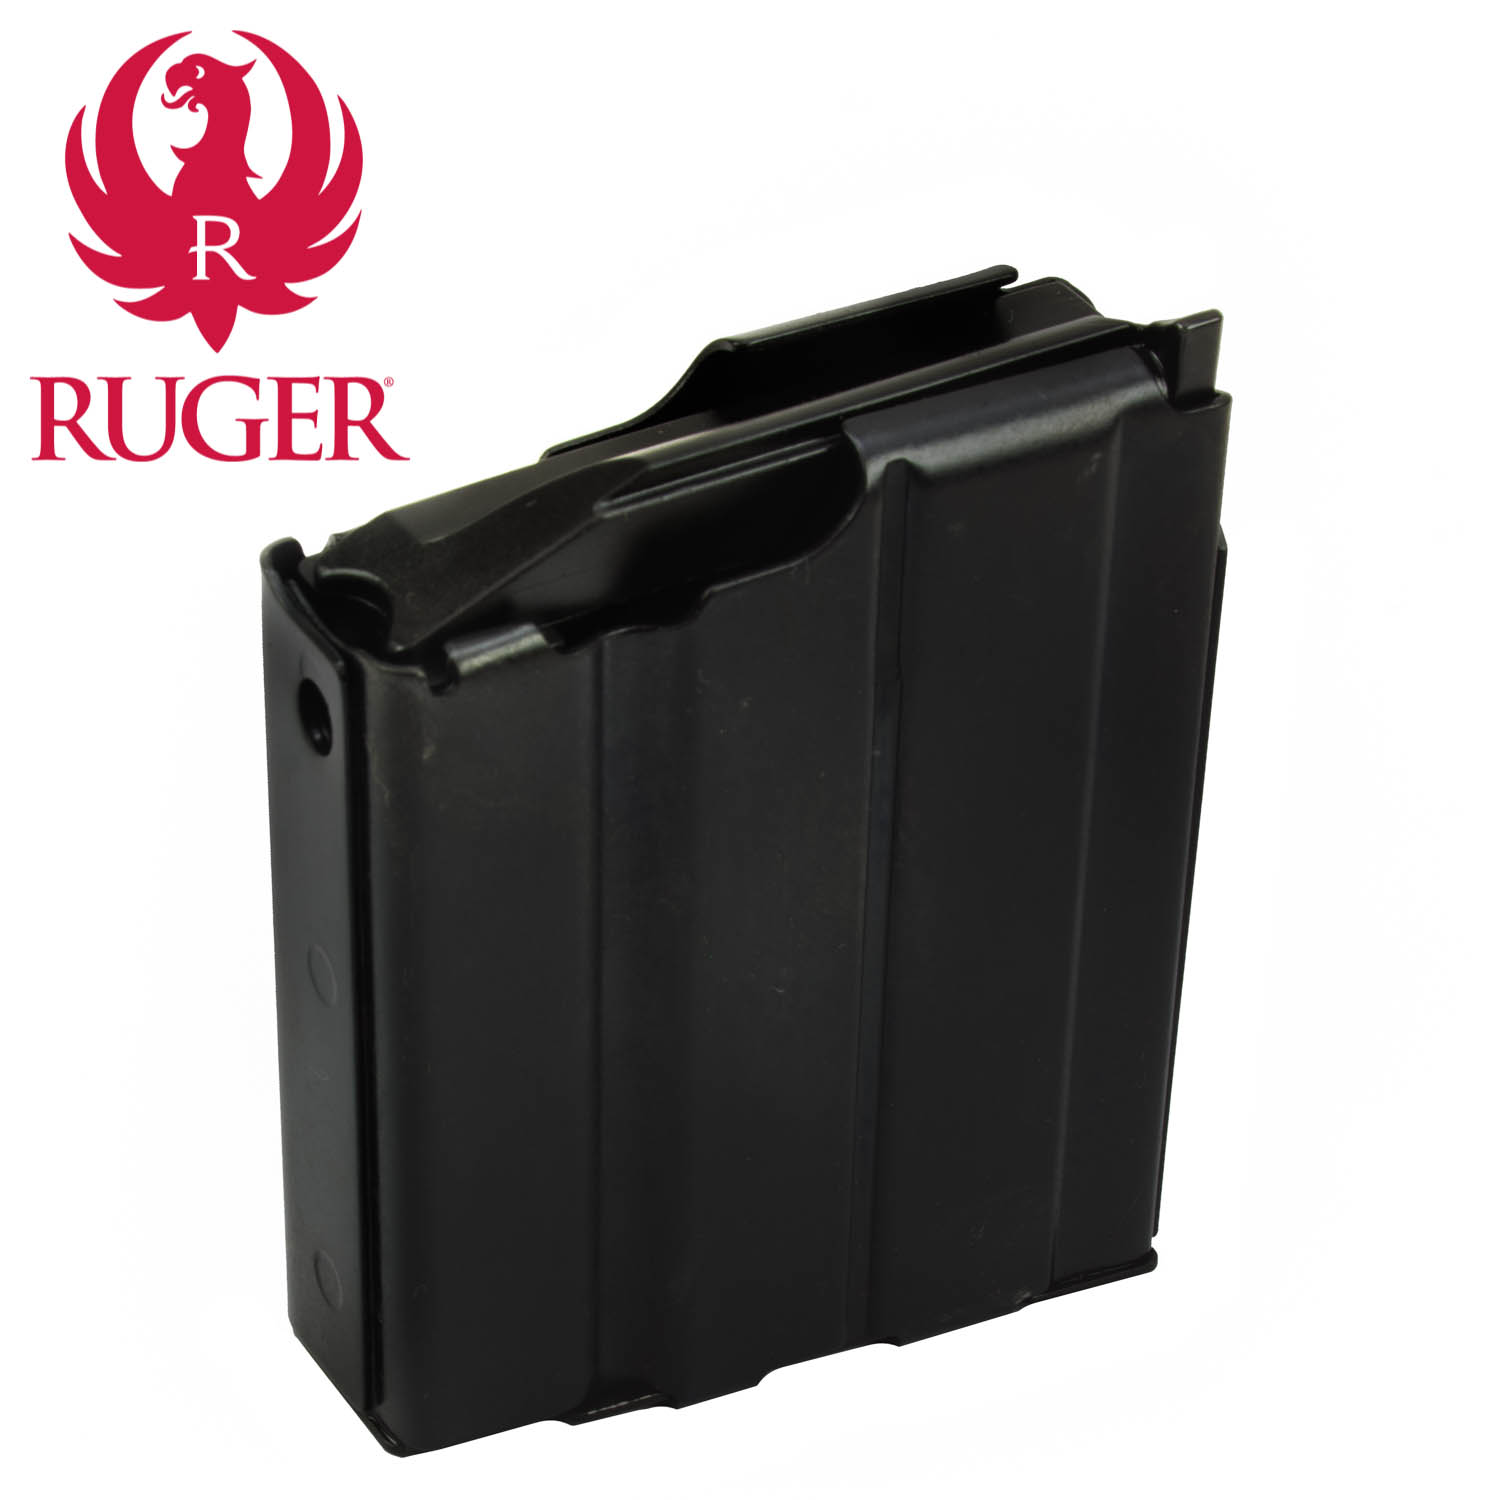 Ruger Mini-14 90339 10 Round Clip Magazine for sale online 